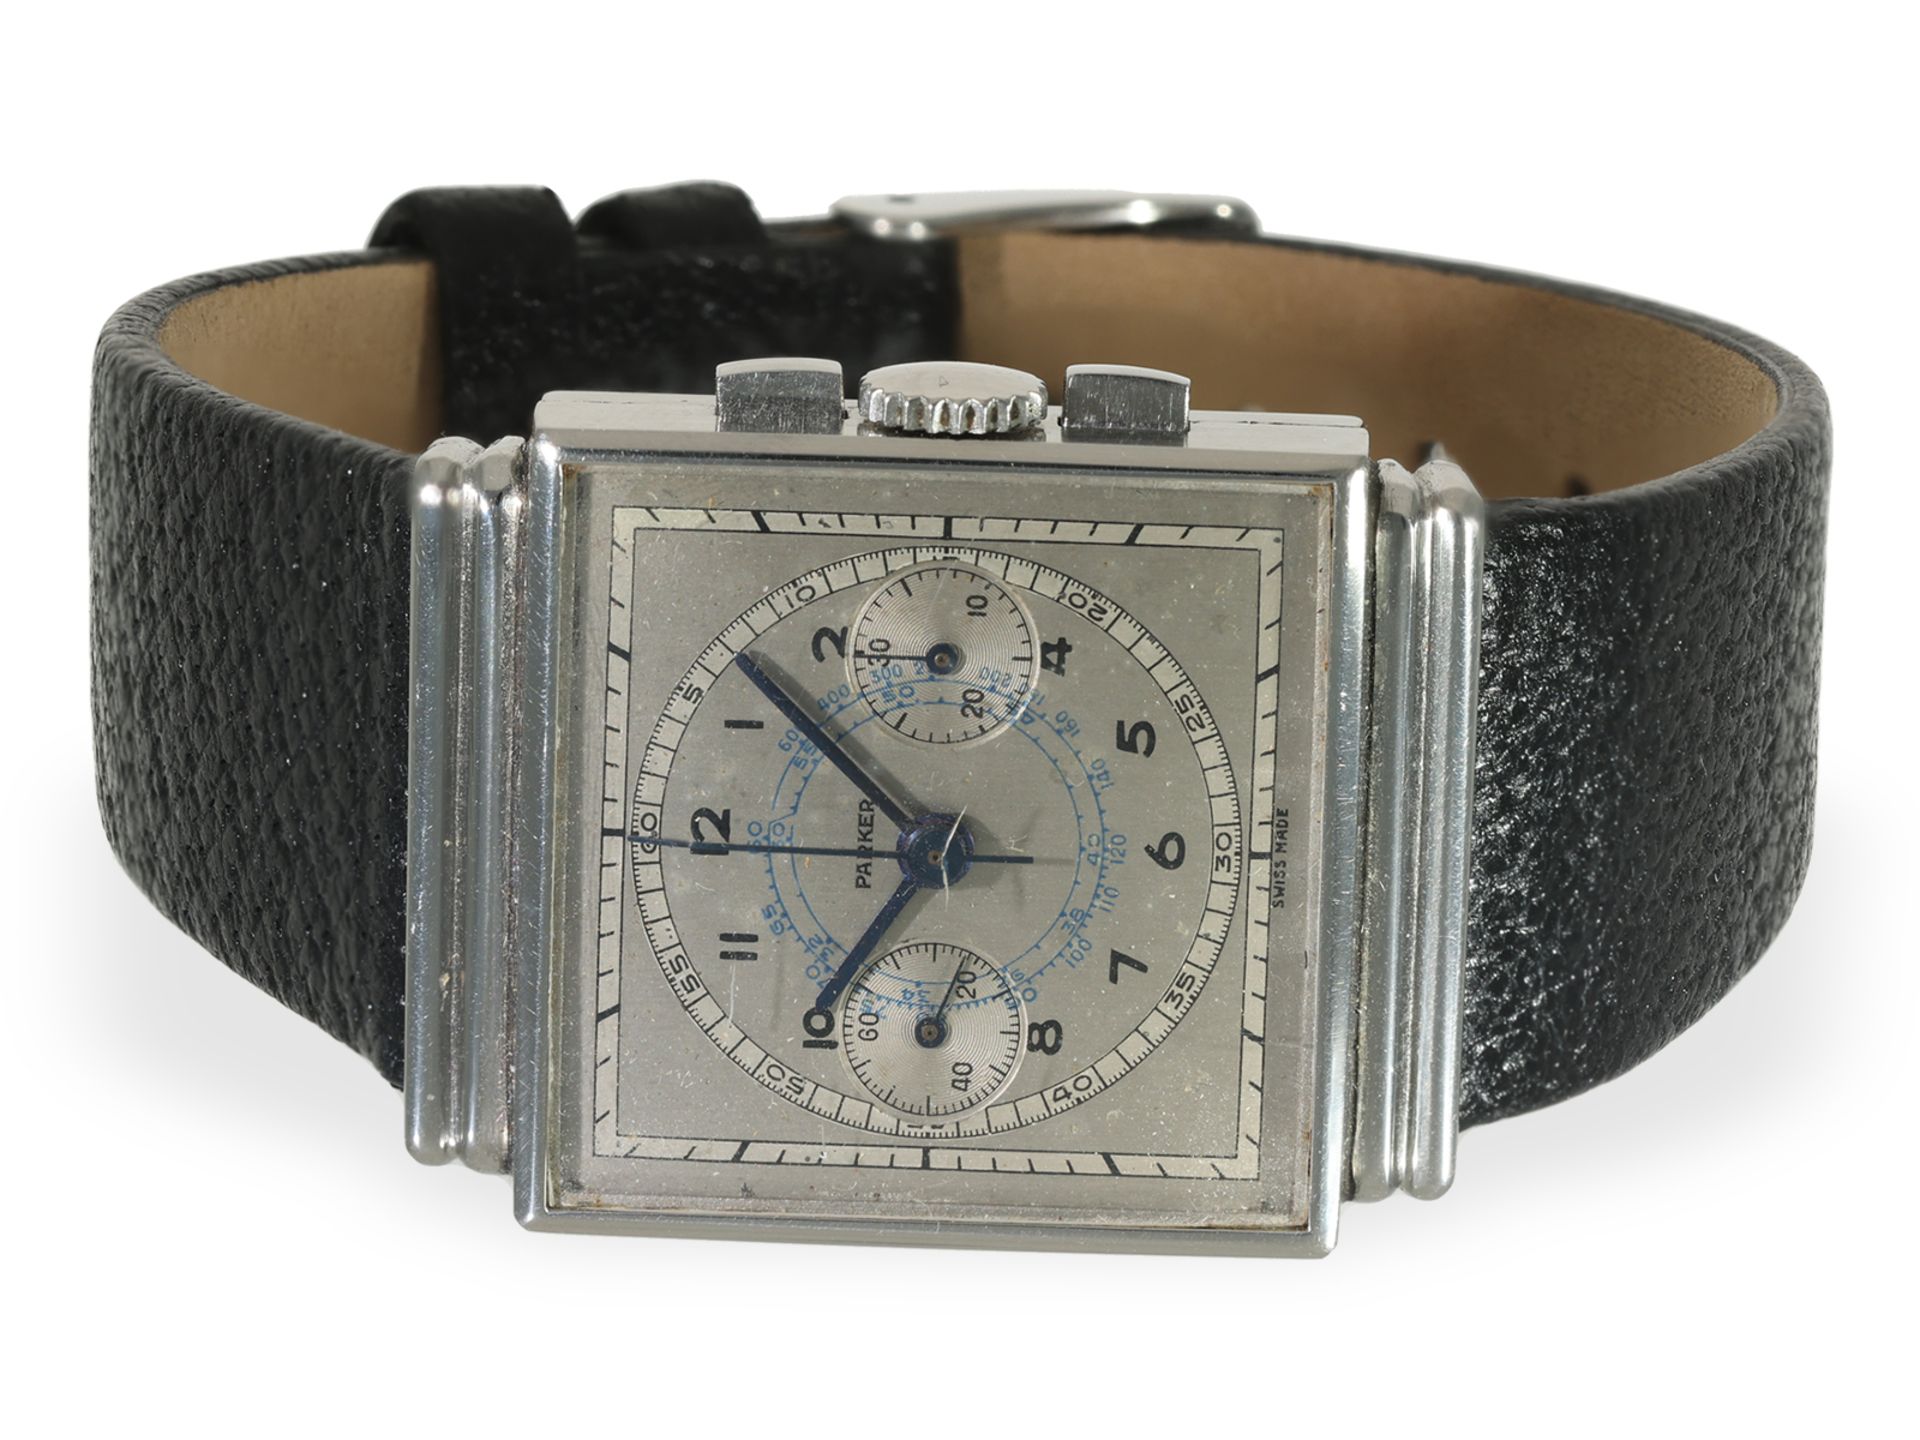 Wristwatch: very beautiful Parker Square Chronograph in steel, Val. 69, 1930s